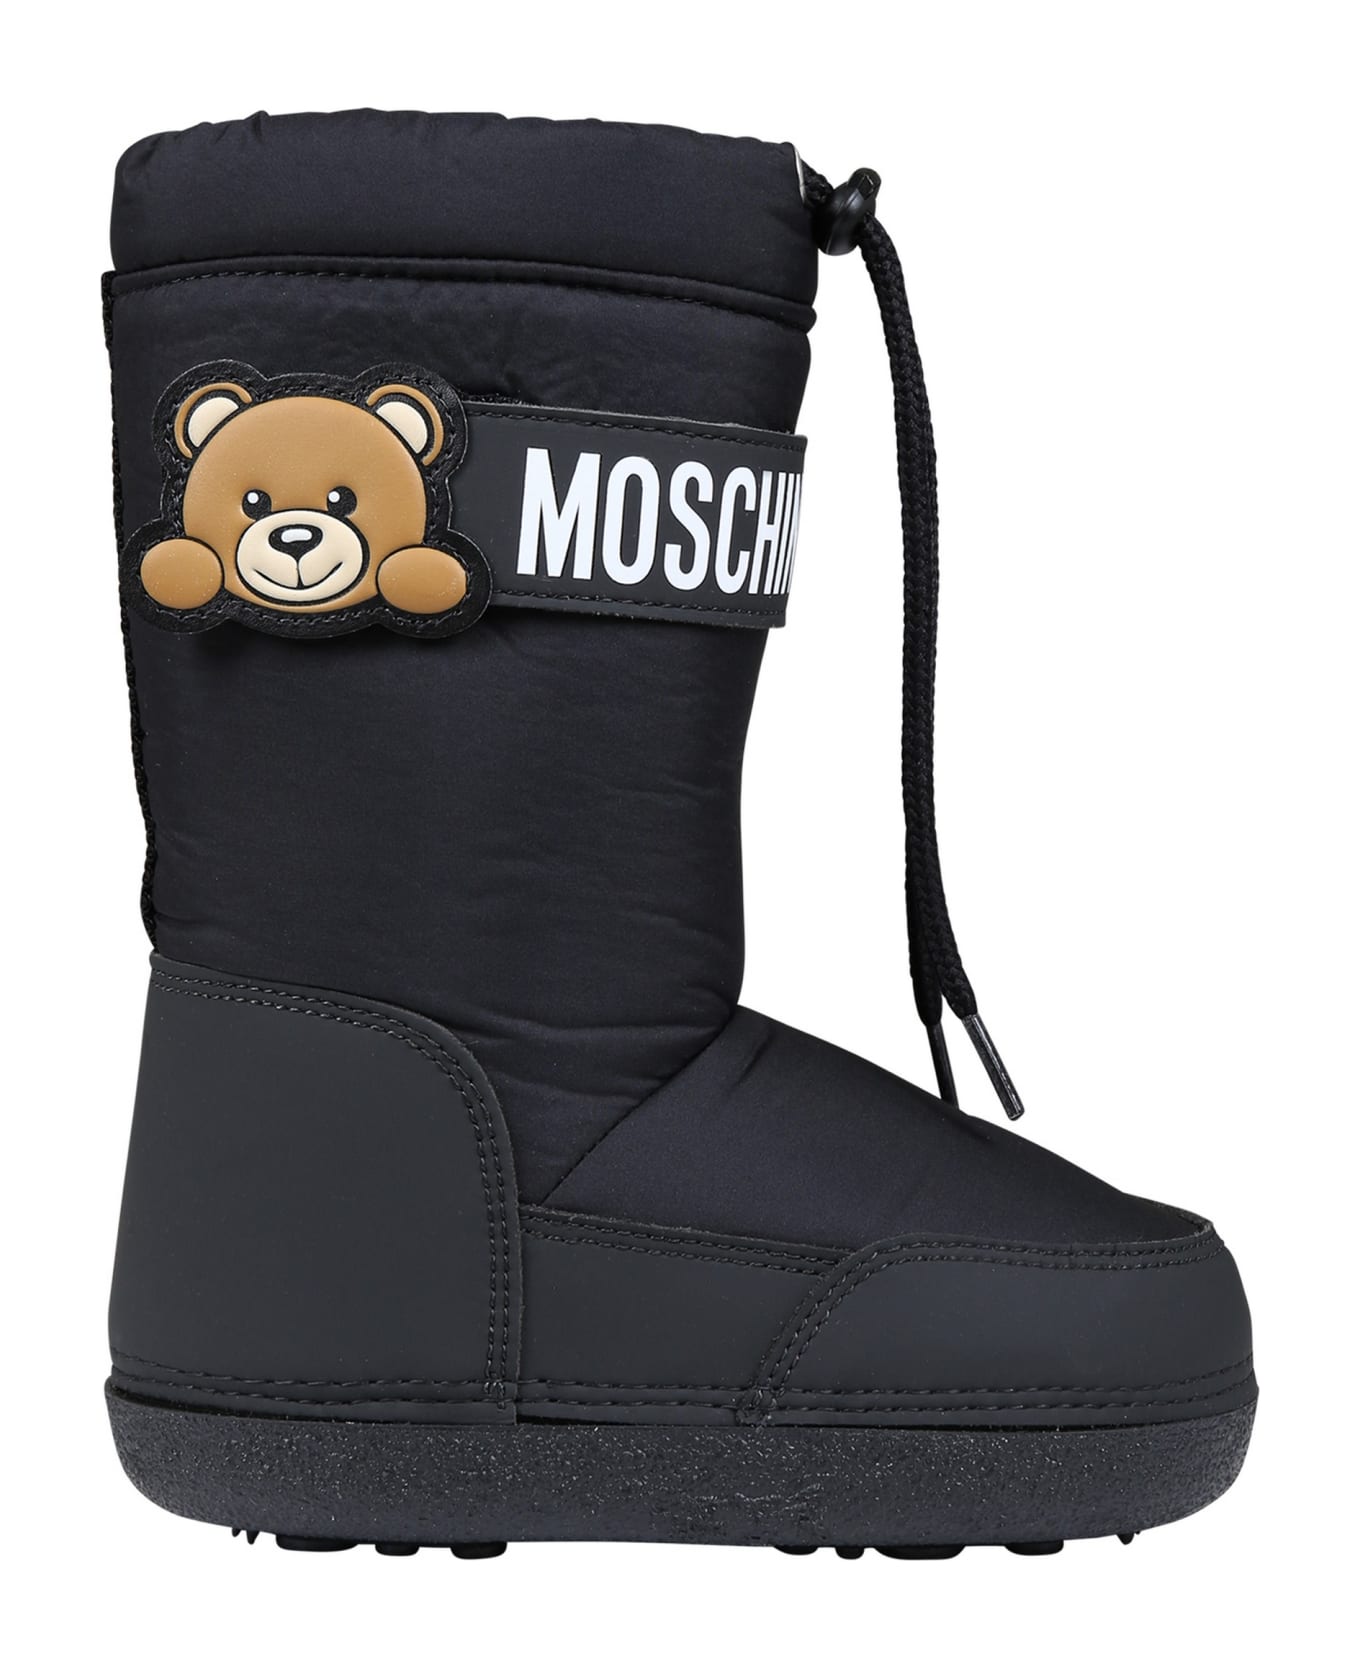 Moschino Balck Boots For Girl With Teddy Bear And Logo - Black シューズ